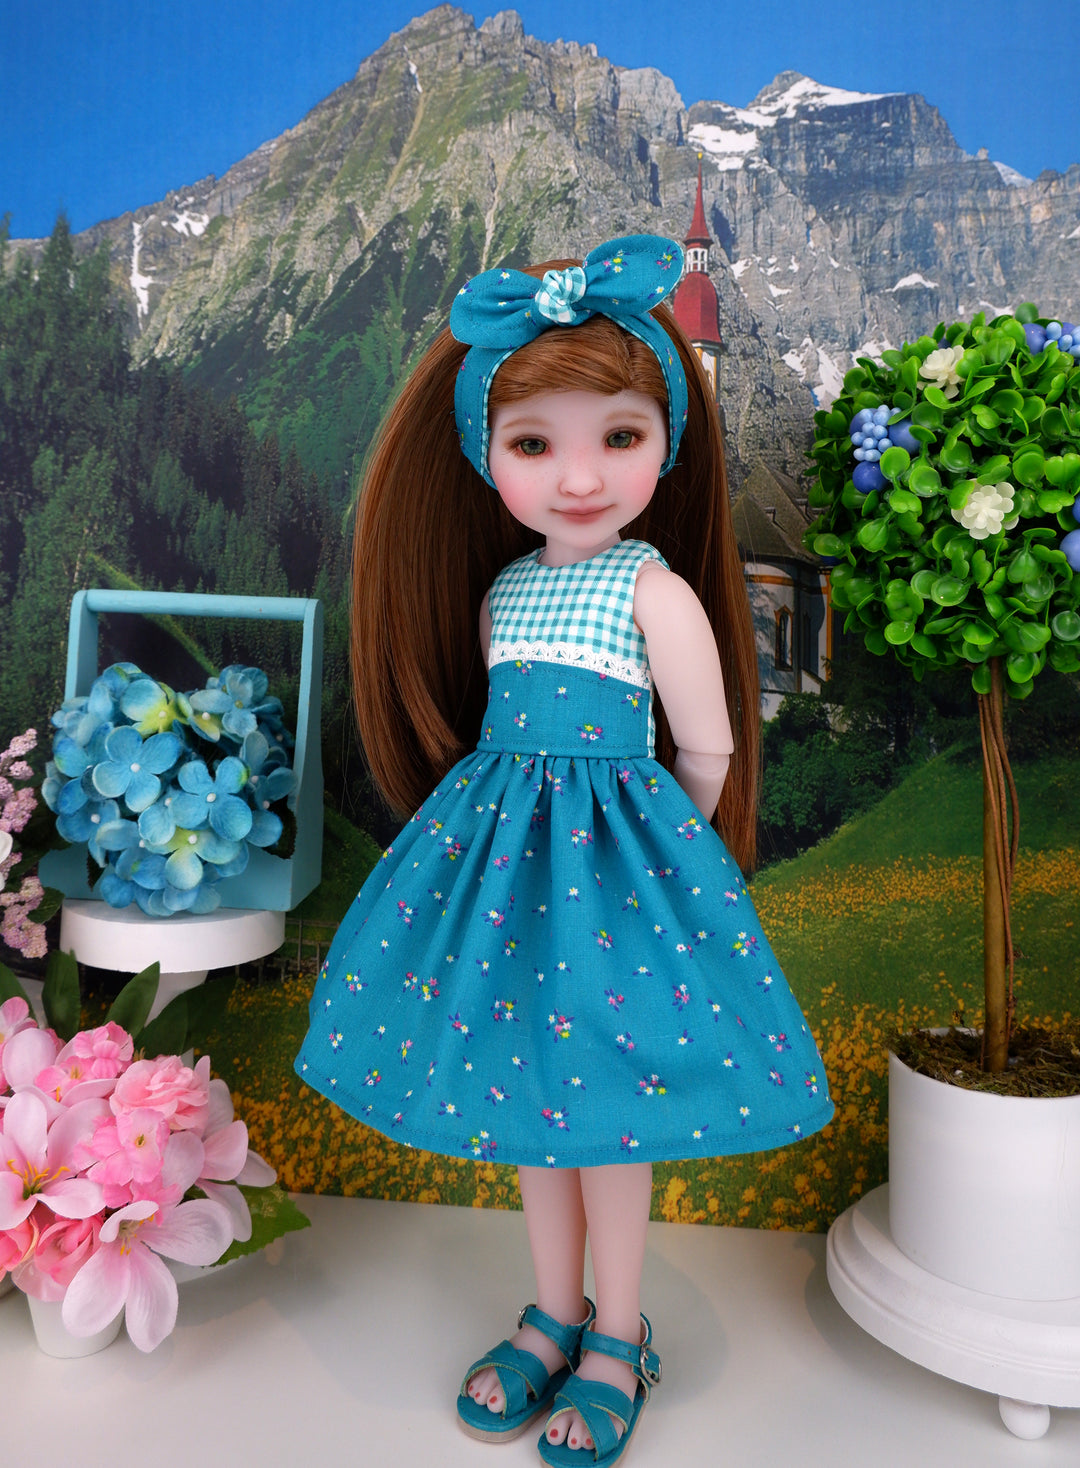 Teal Posies - dress and sandals for Ruby Red Fashion Friends doll